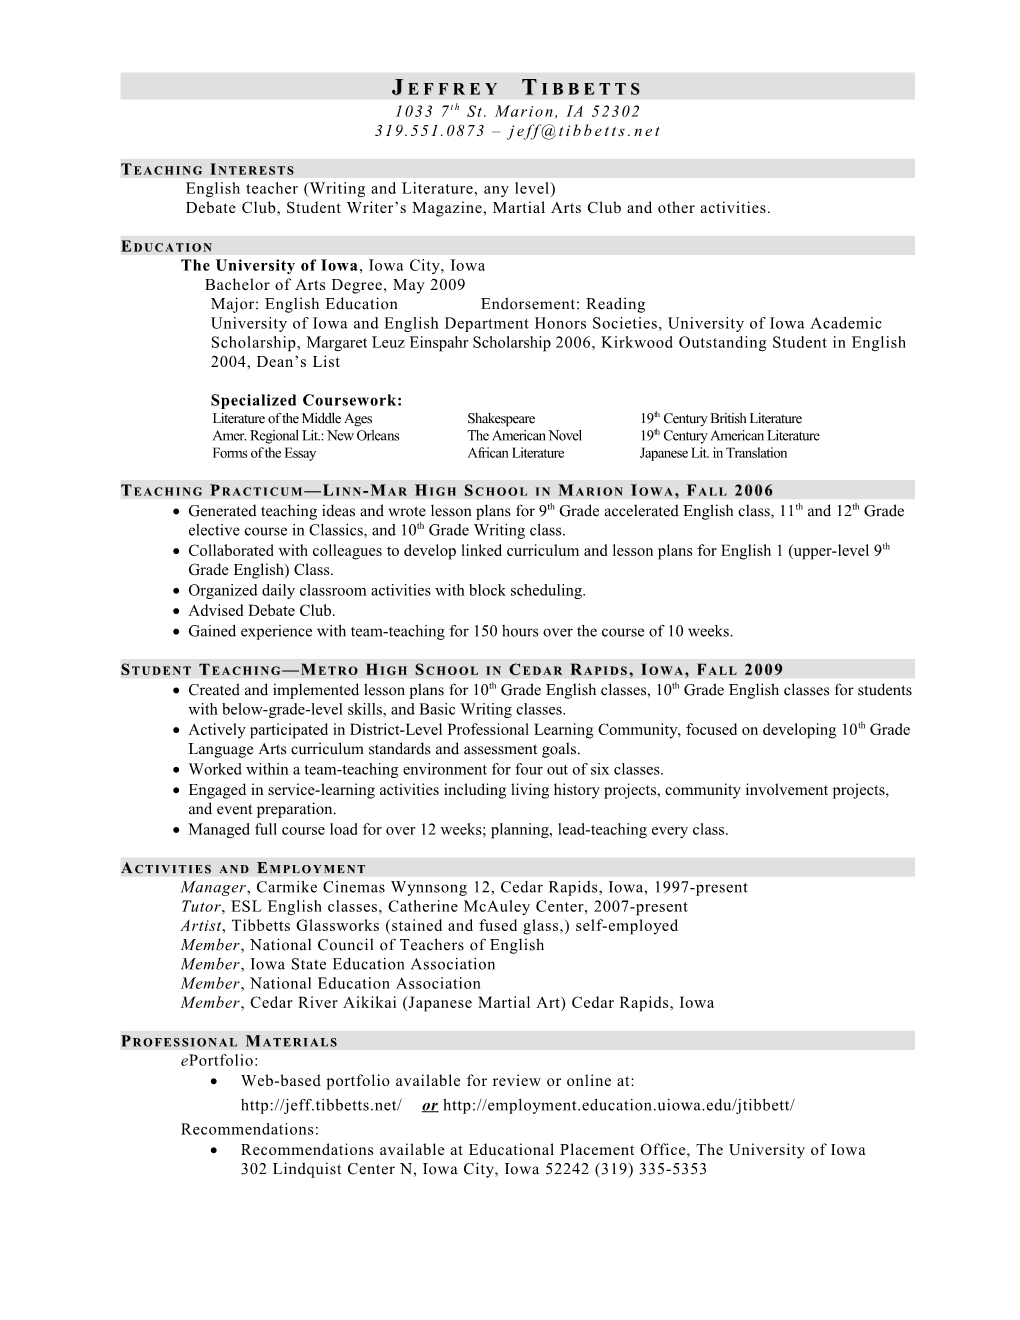 English Teacher (Writing and Literature, Any Level)